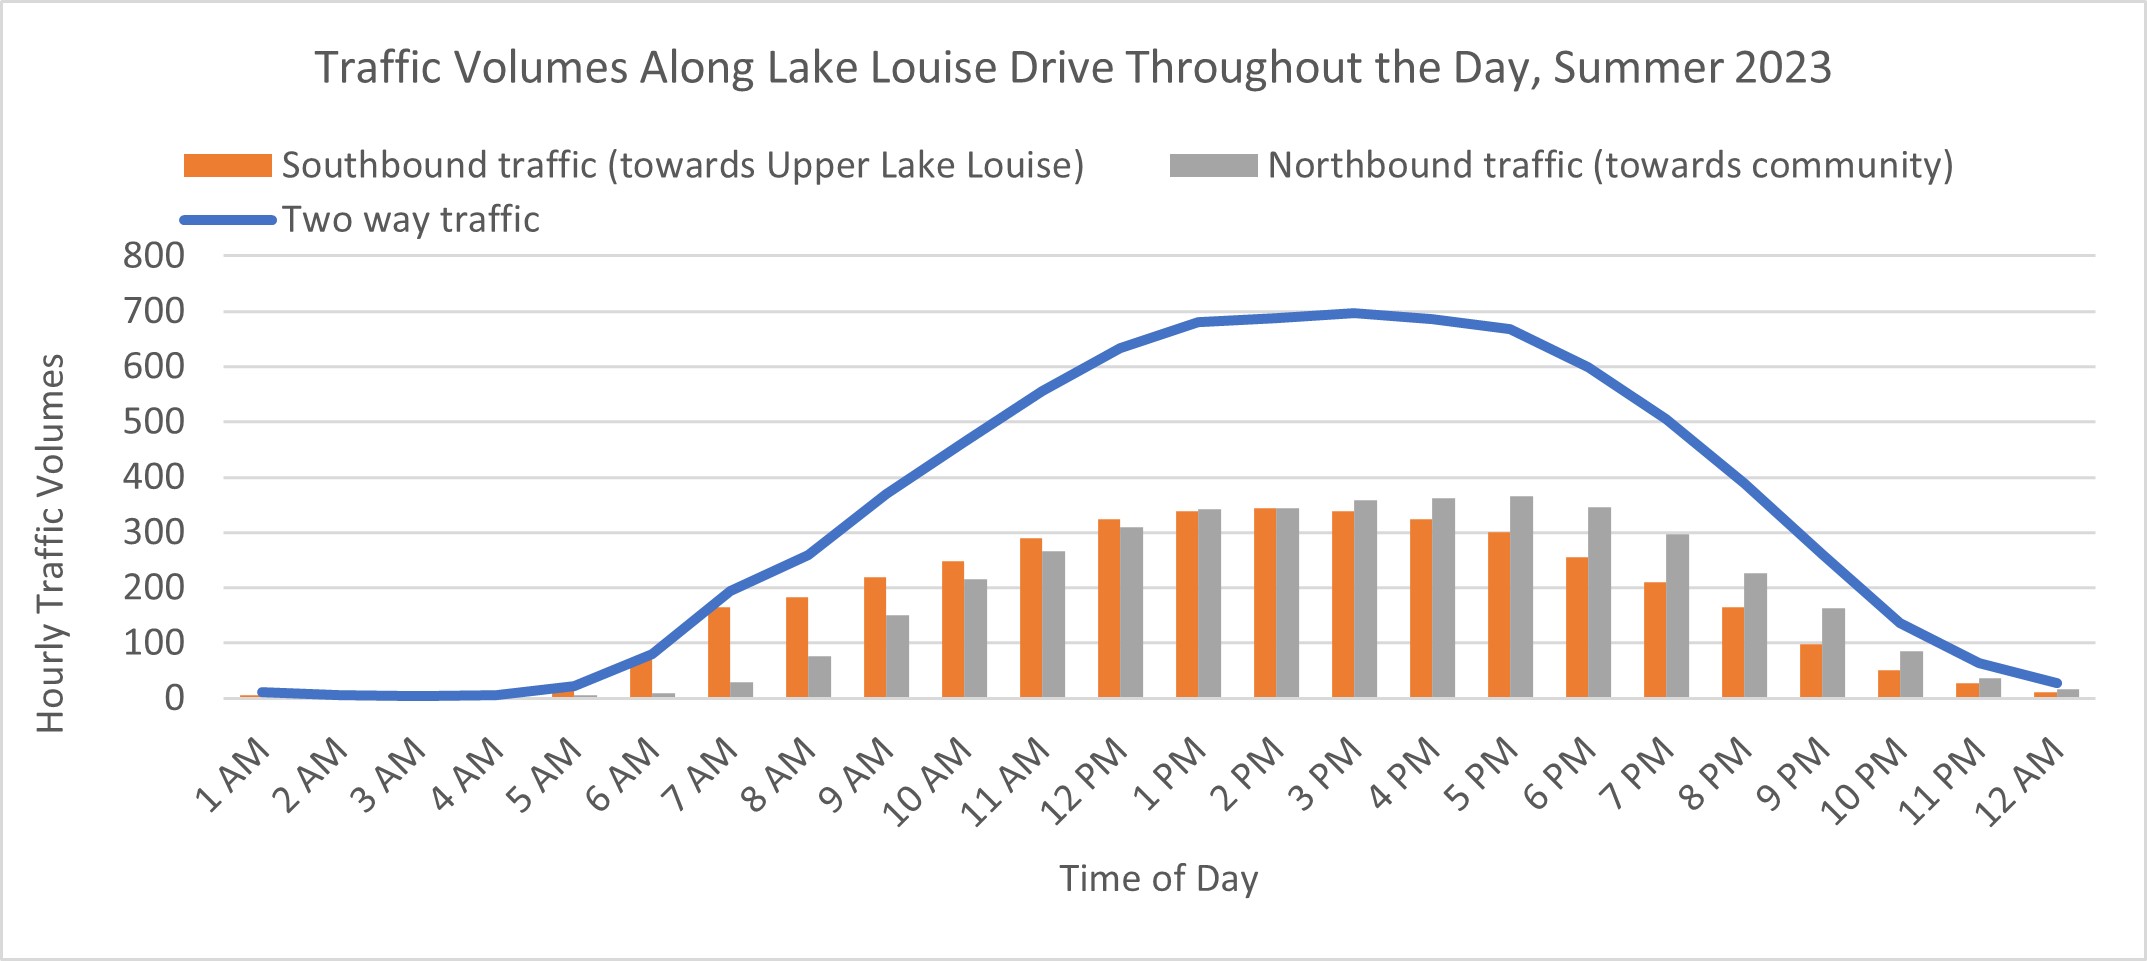 Graphic of Traffic Volumes Along Lake Louise Drive Throughout the Day, Summer 2023. More details provided in the text version below. 